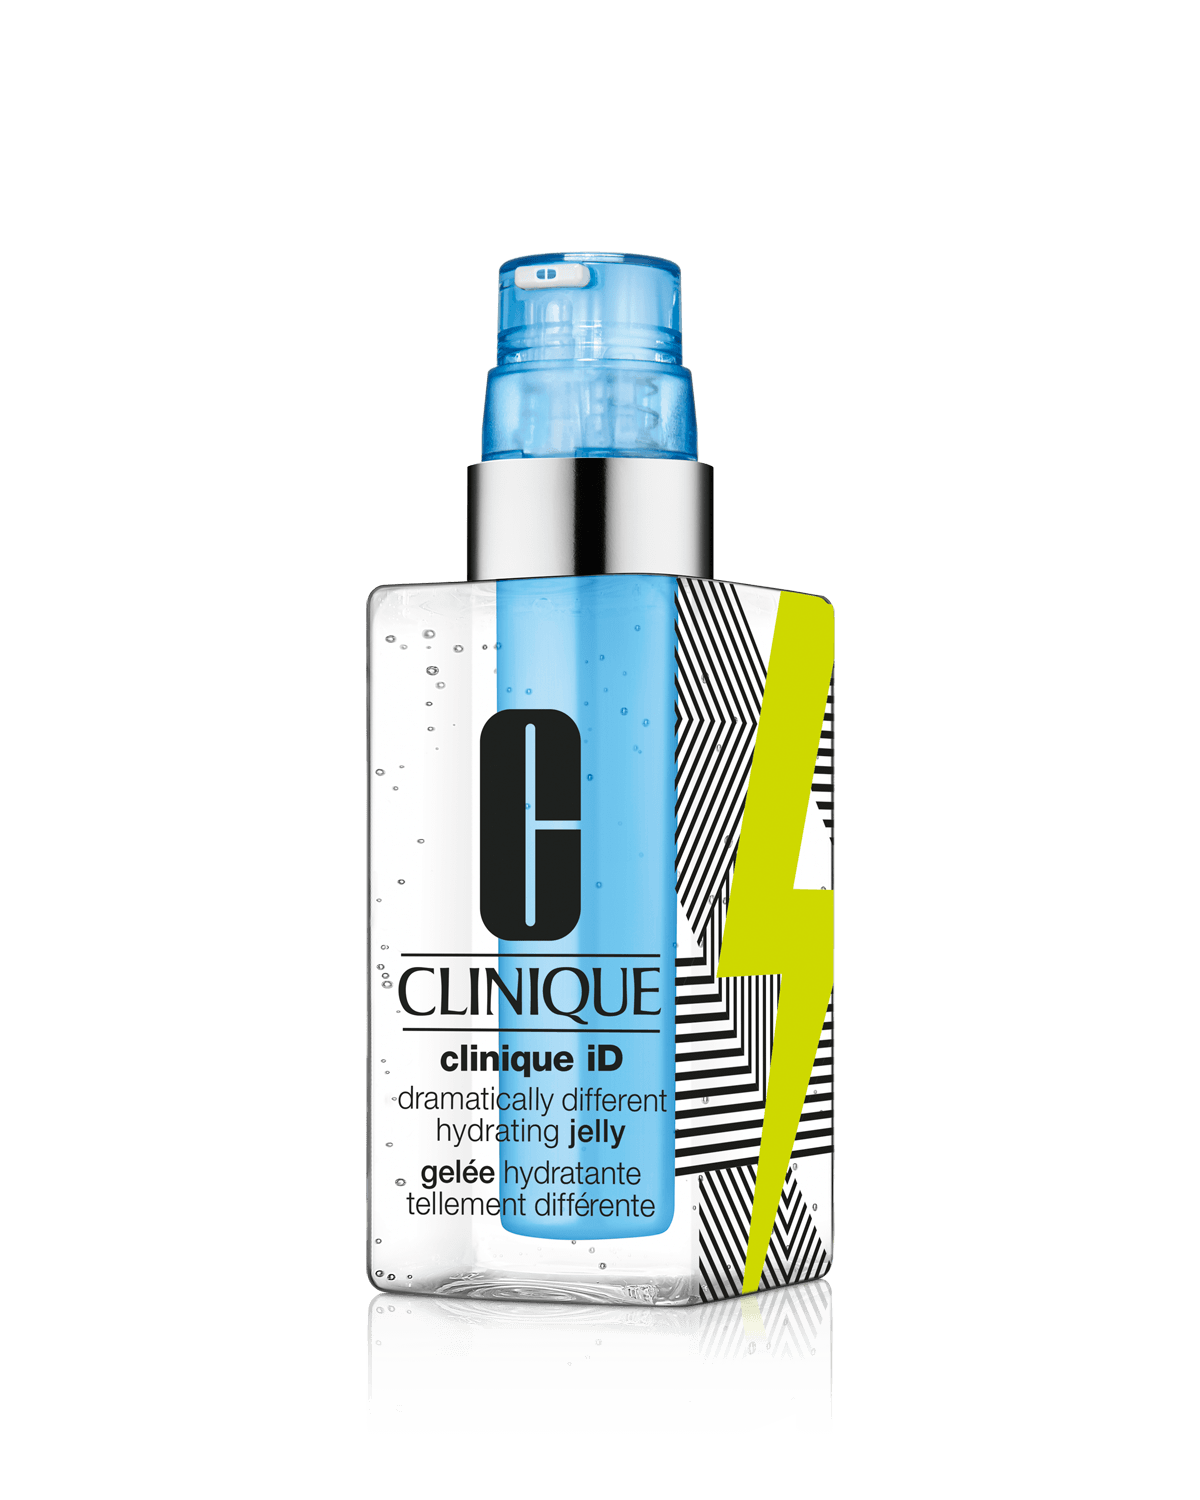 Limited Edition Print Clinique iD: Dramatically Different™ Hydrating Jelly & Active Cartridge Concentrate for Pores & Uneven Skin Texture